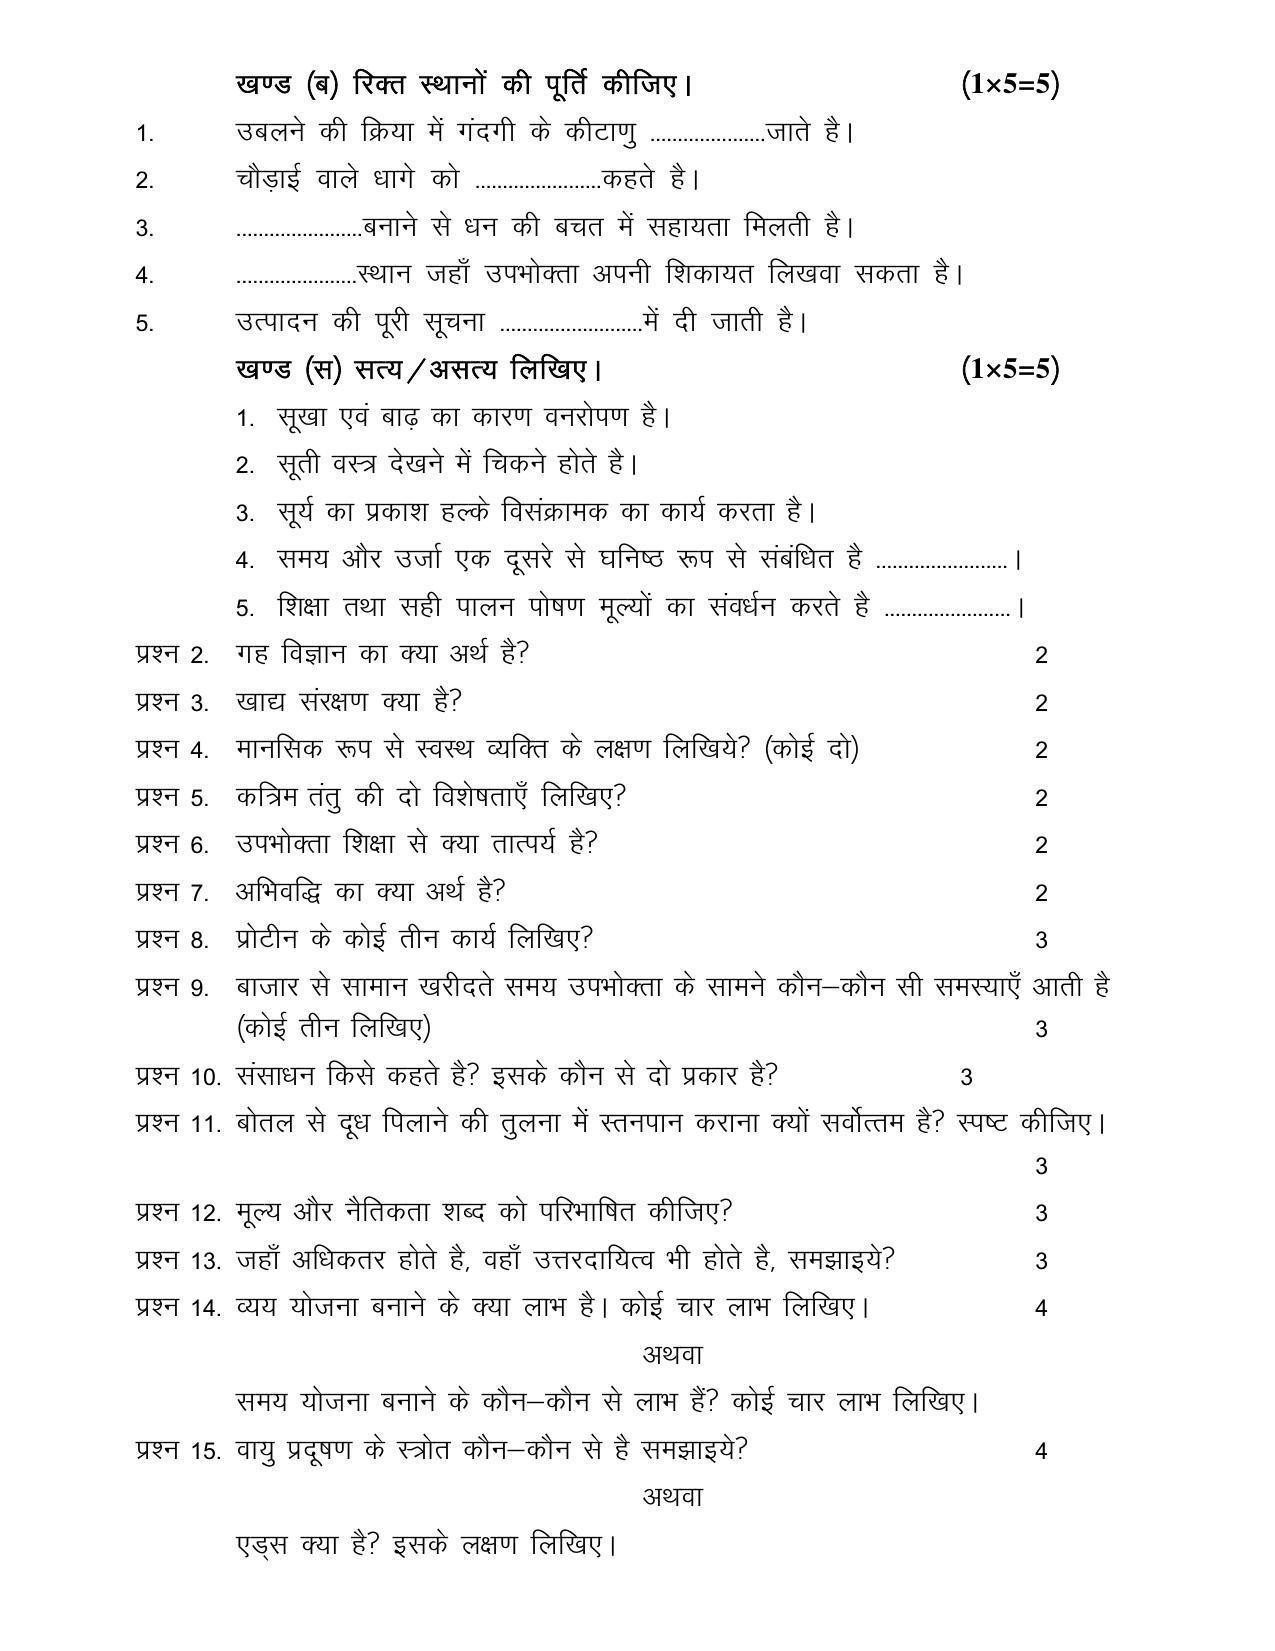 CGSOS Class 10th Model Question Paper - Home Science - II - Page 2